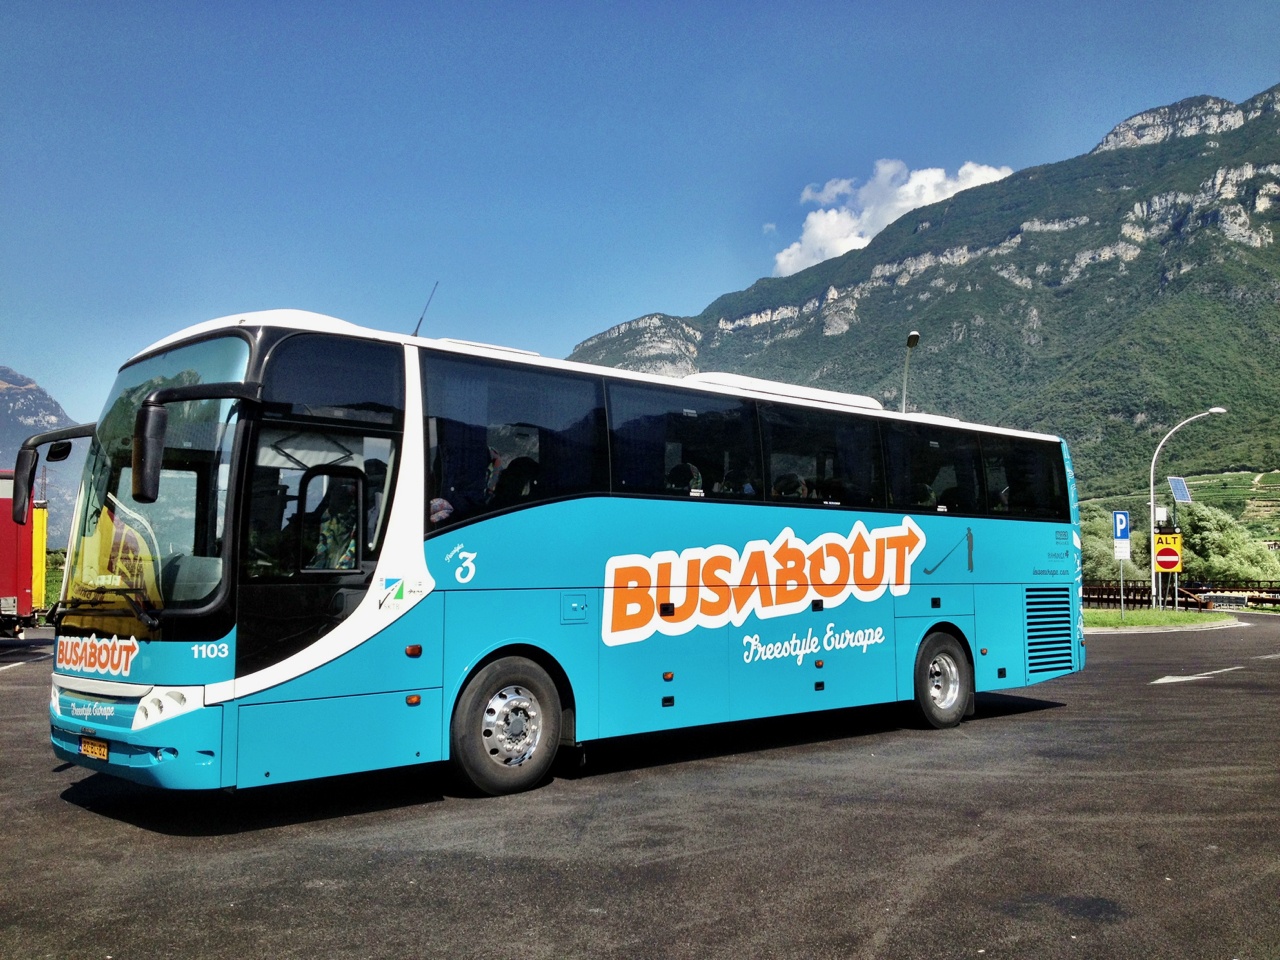 tours like busabout